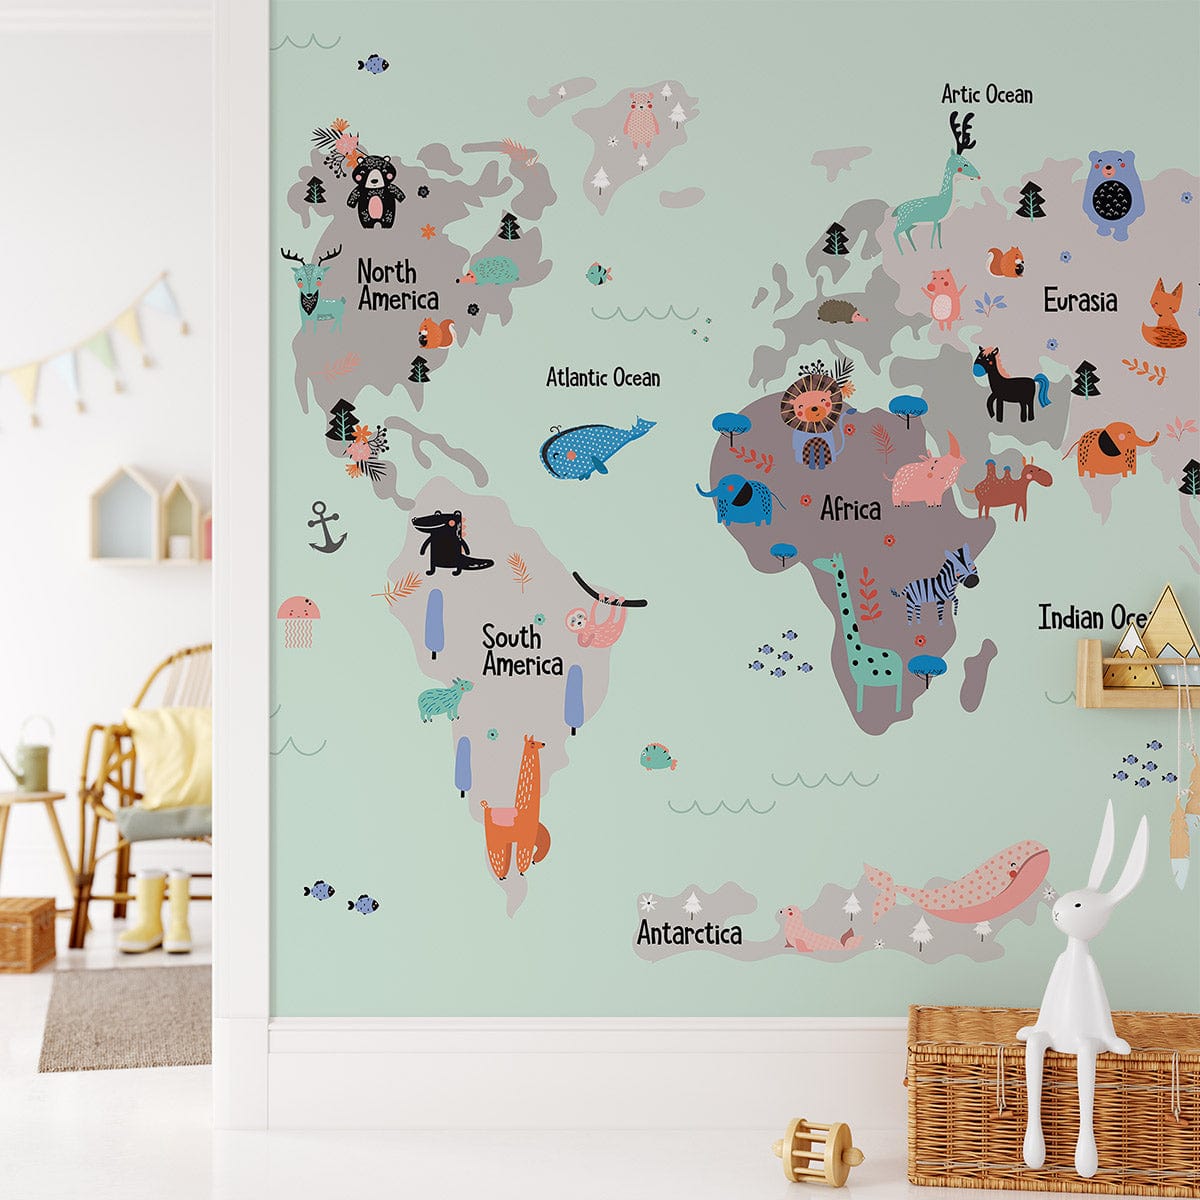 a fun and cheery way to decorate your walls with an animal map